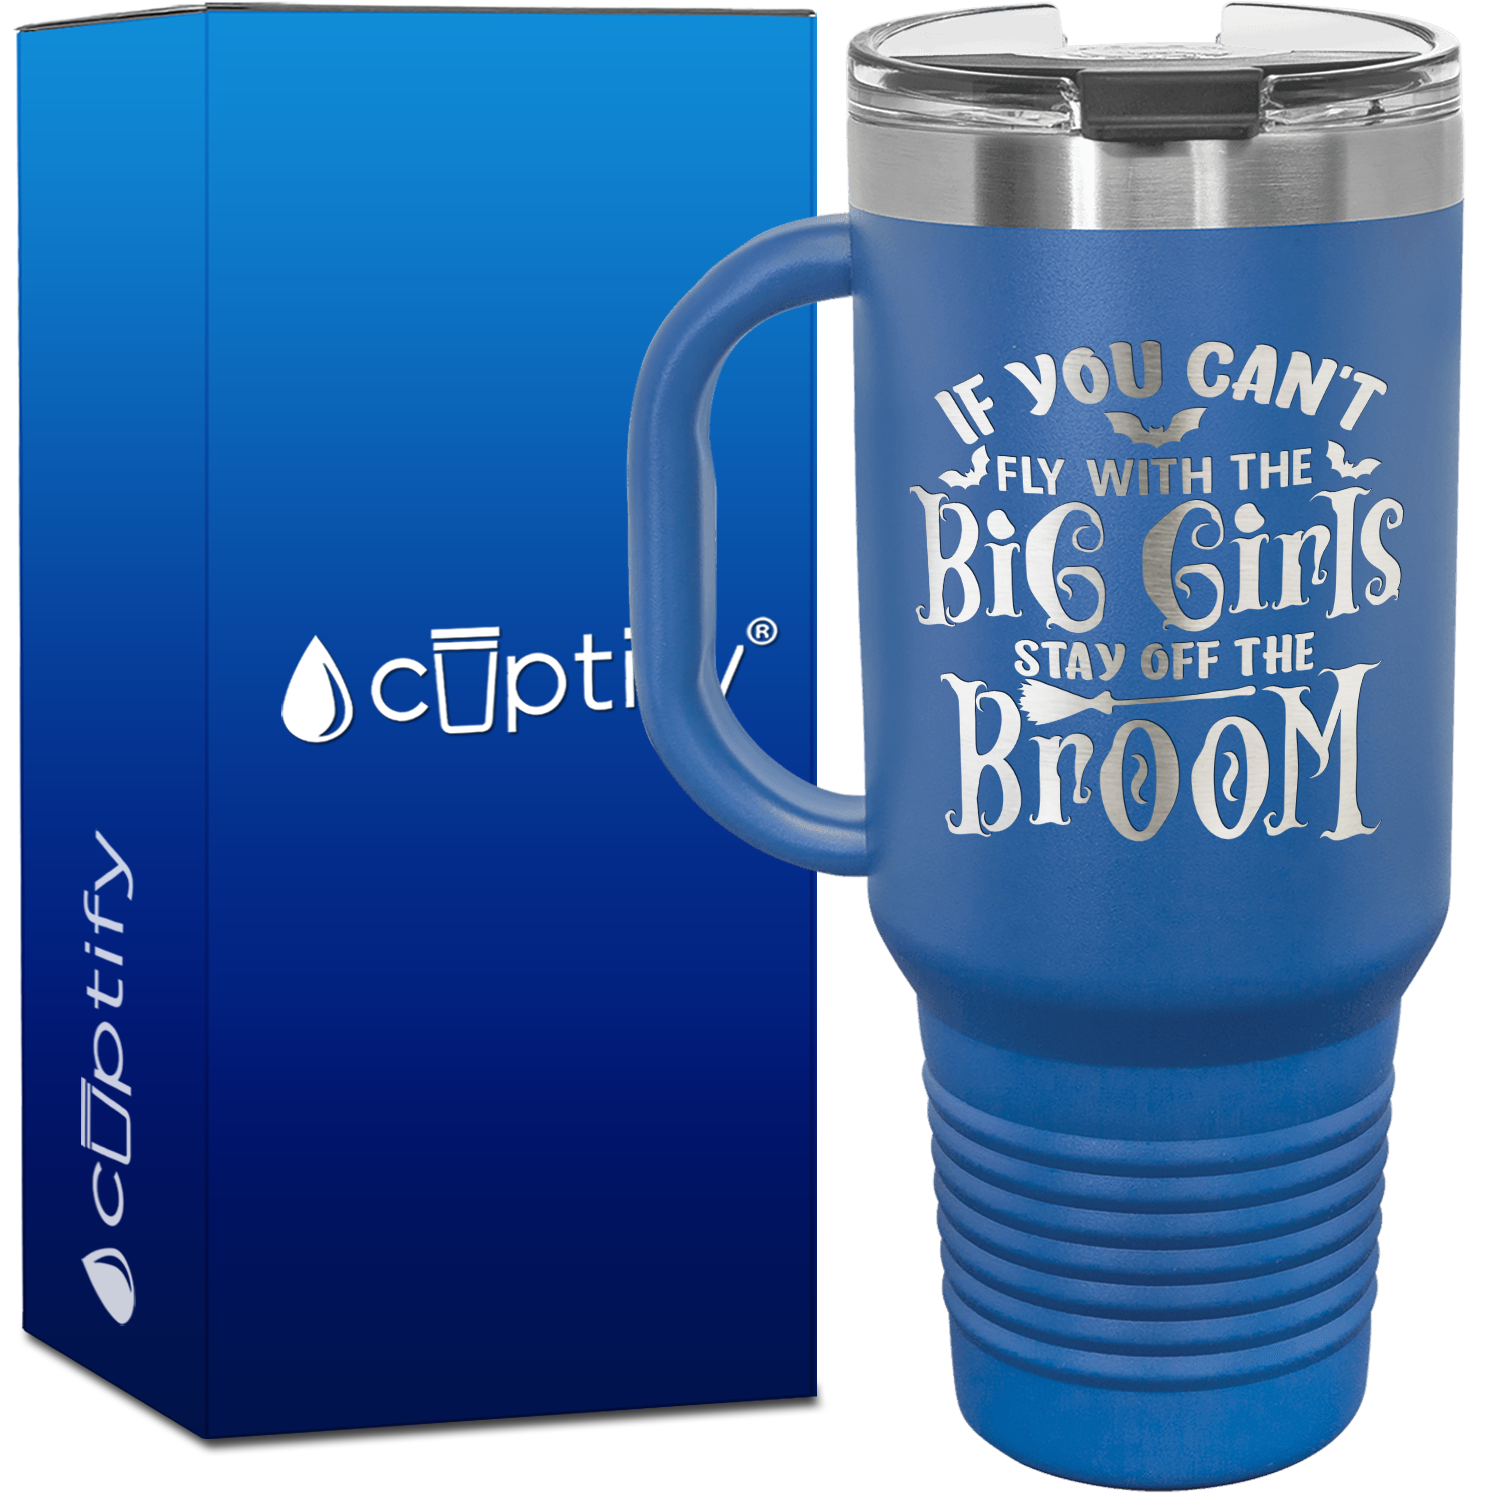 If You Cant Fly with the Big Girls 40oz Halloween Travel Mug